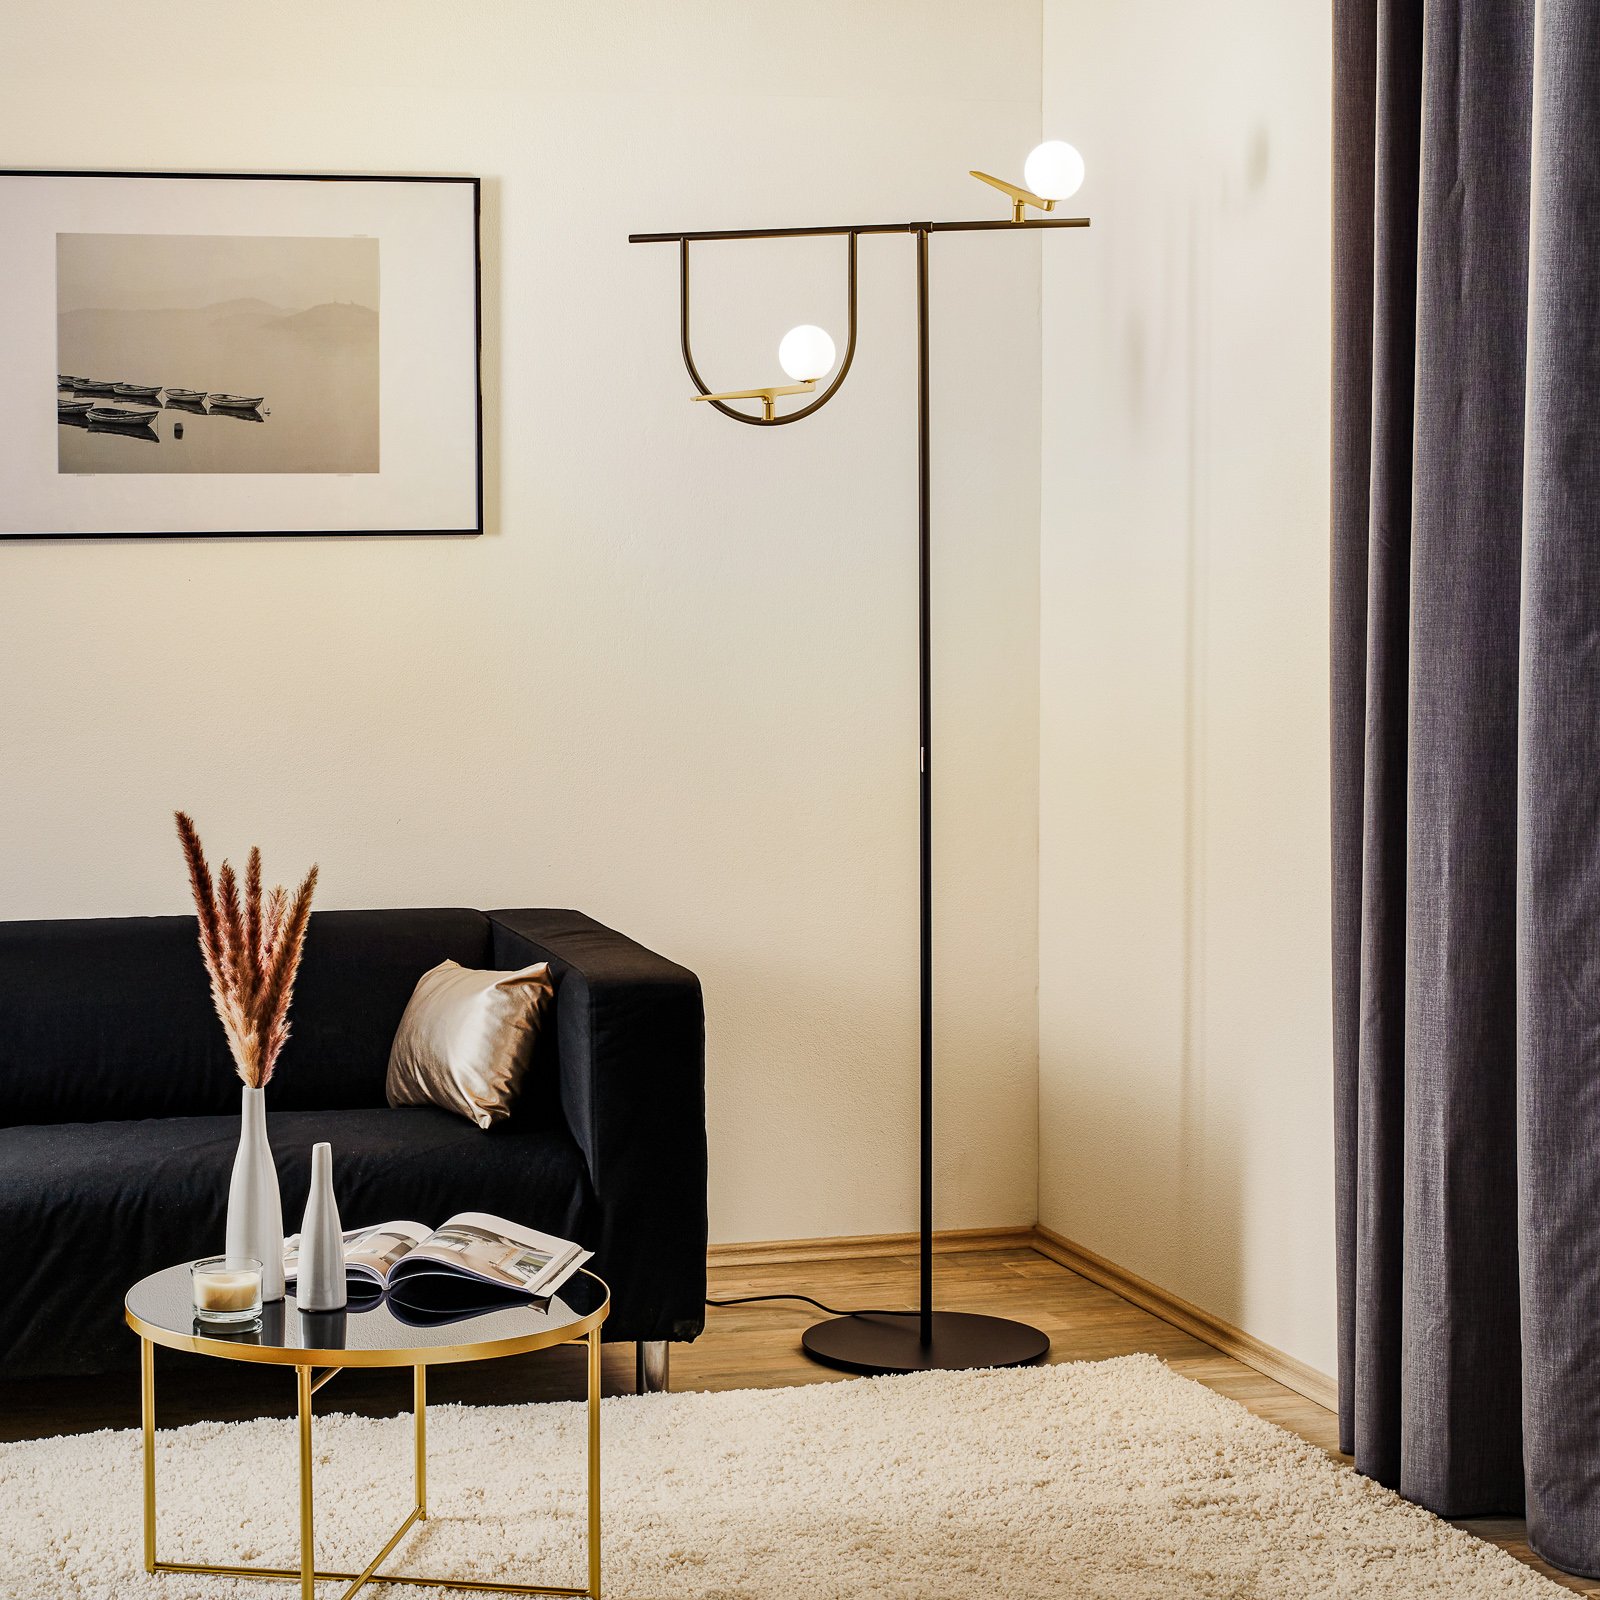 Artemide Yanzi LED floor lamp with a touch dimmer